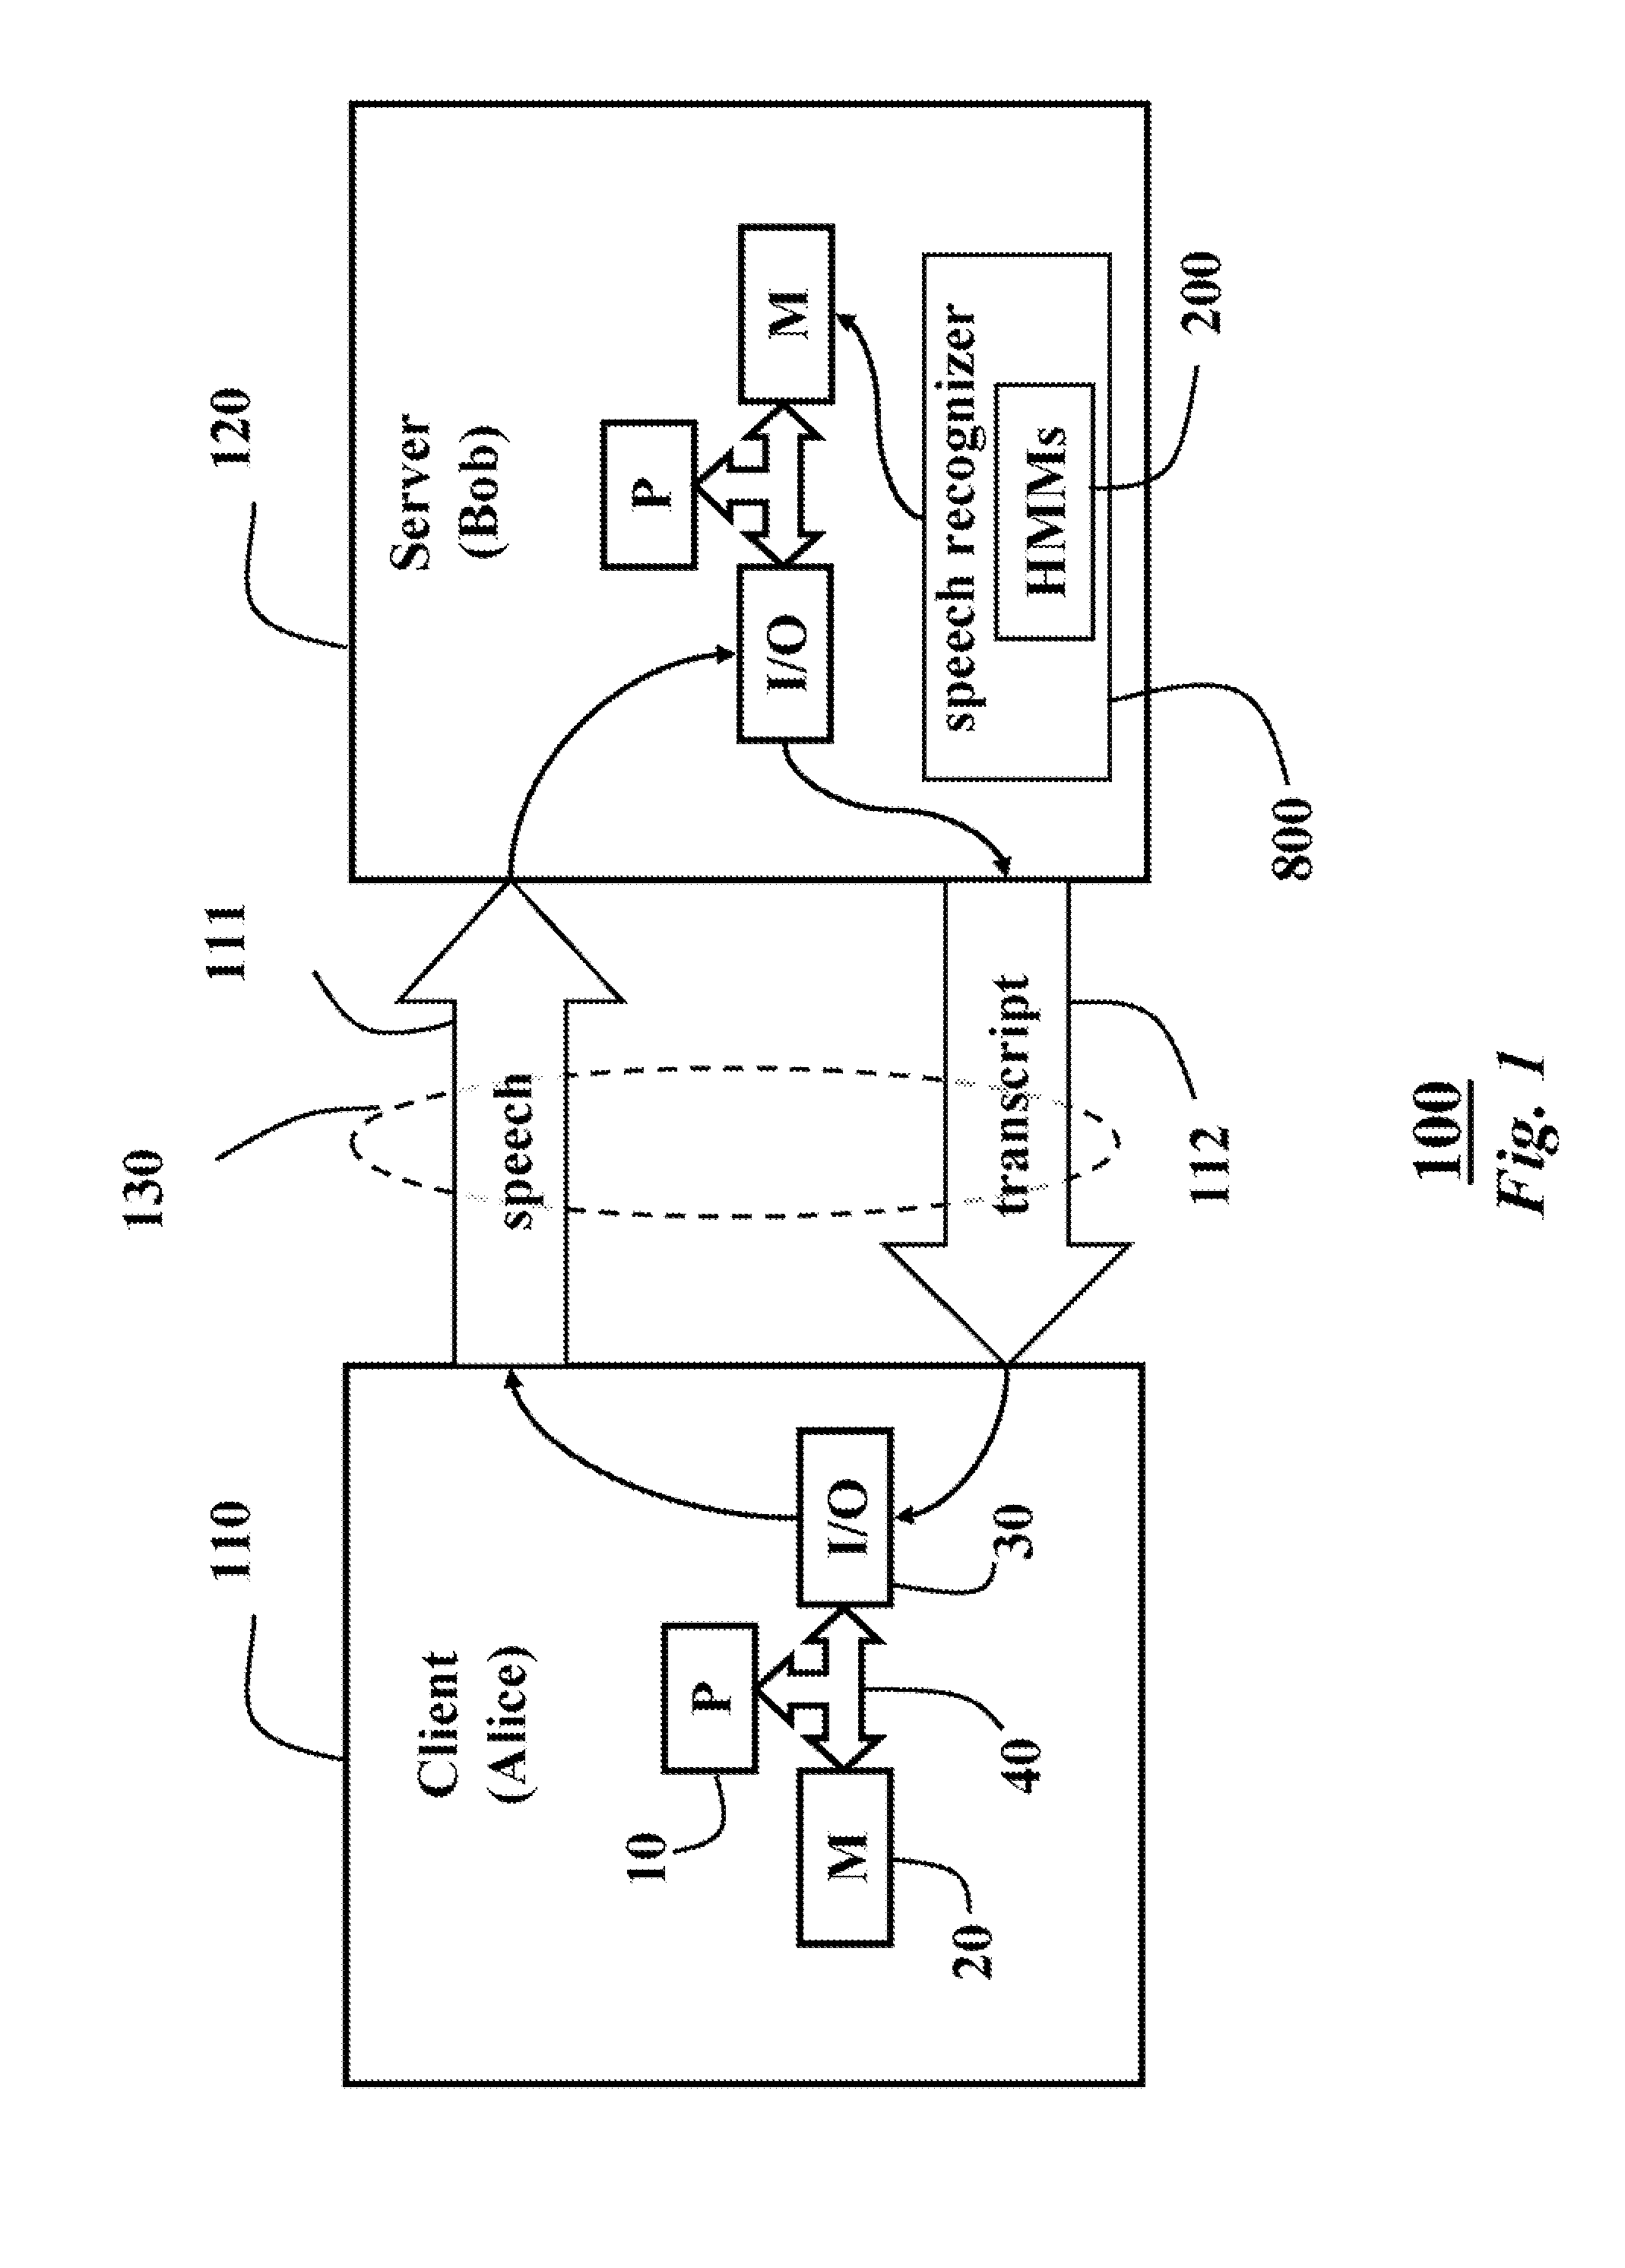 System and method for recognizing speech securely using a secure multi-party computation protocol